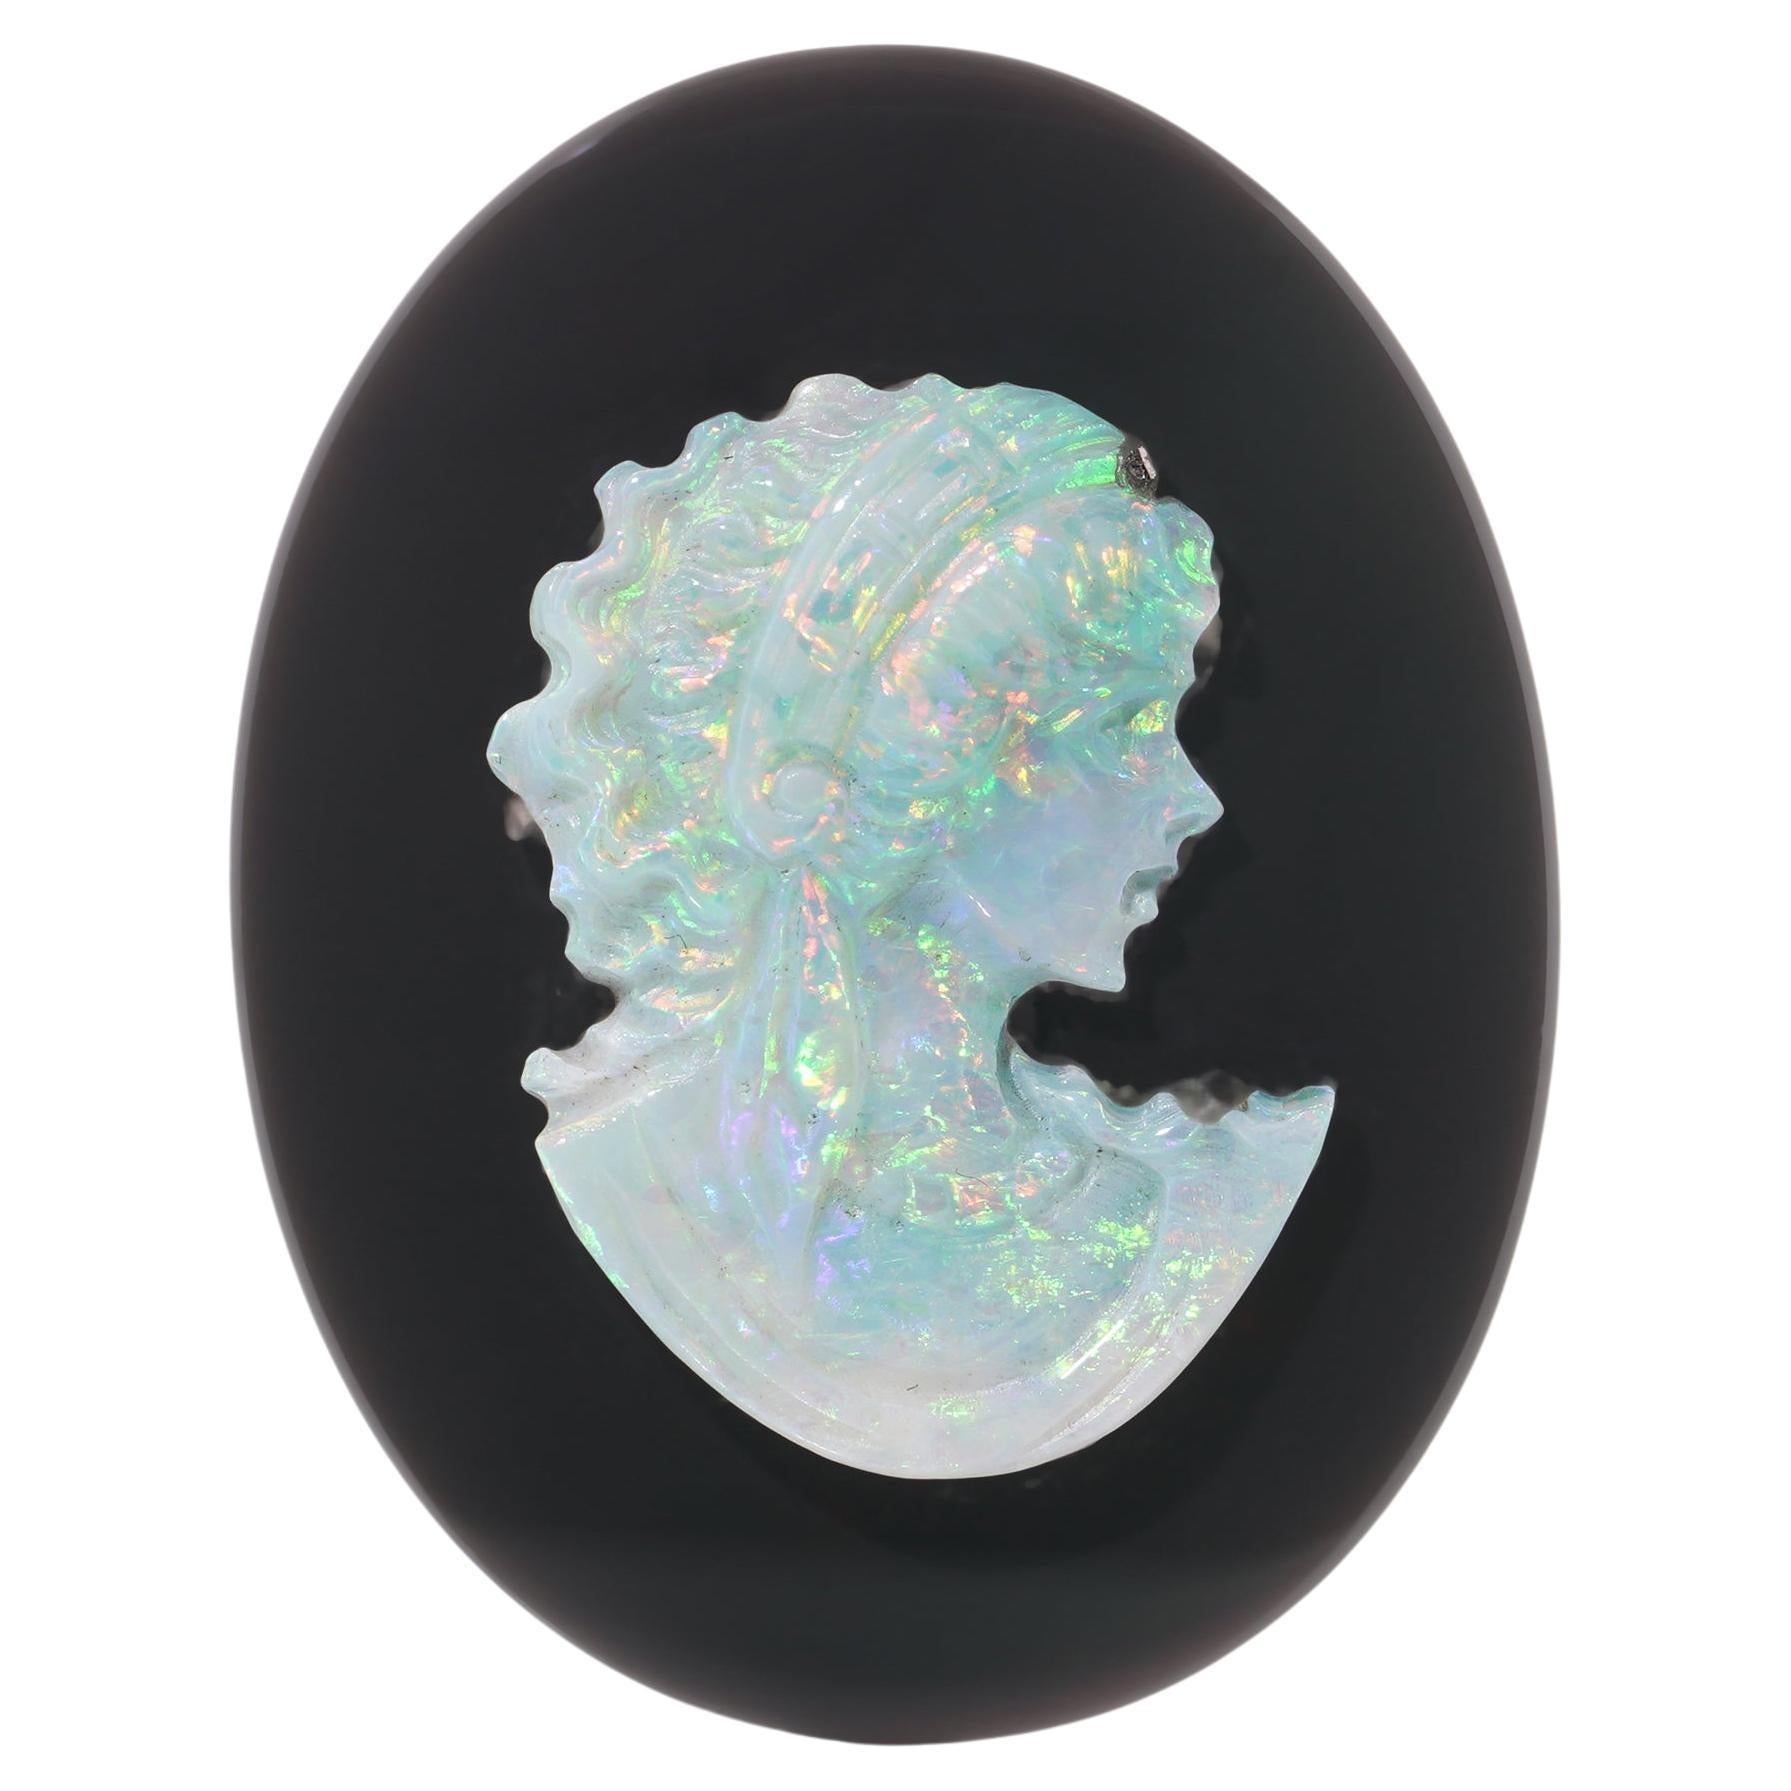 Antique opal carving cameo mounted on the onyx plaque. 